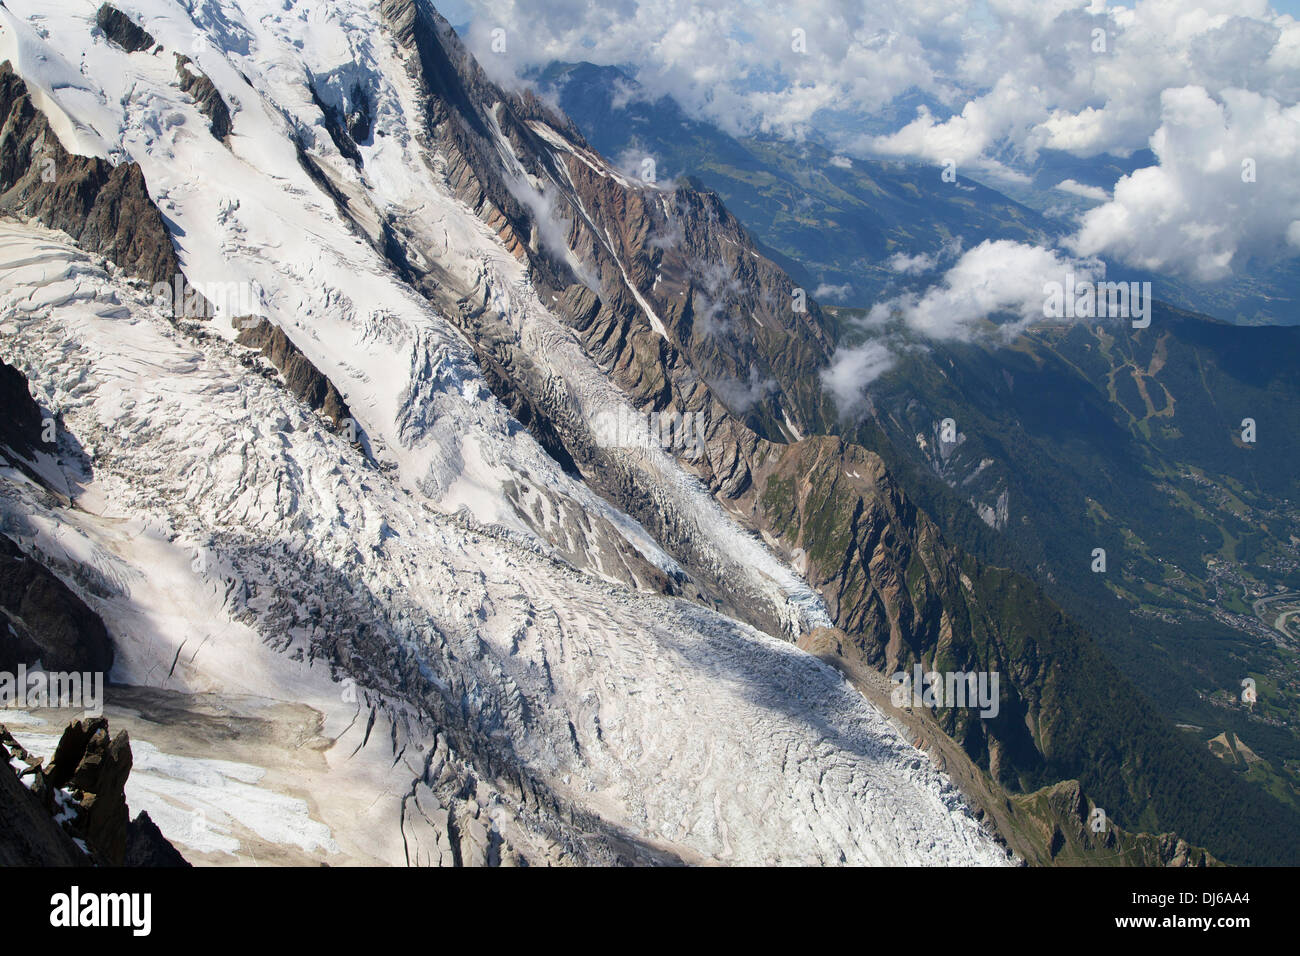 La Jonction, union of the glaciers of Bossons and Taconnaz in the Mont Blanc massif, French Alps. Stock Photo